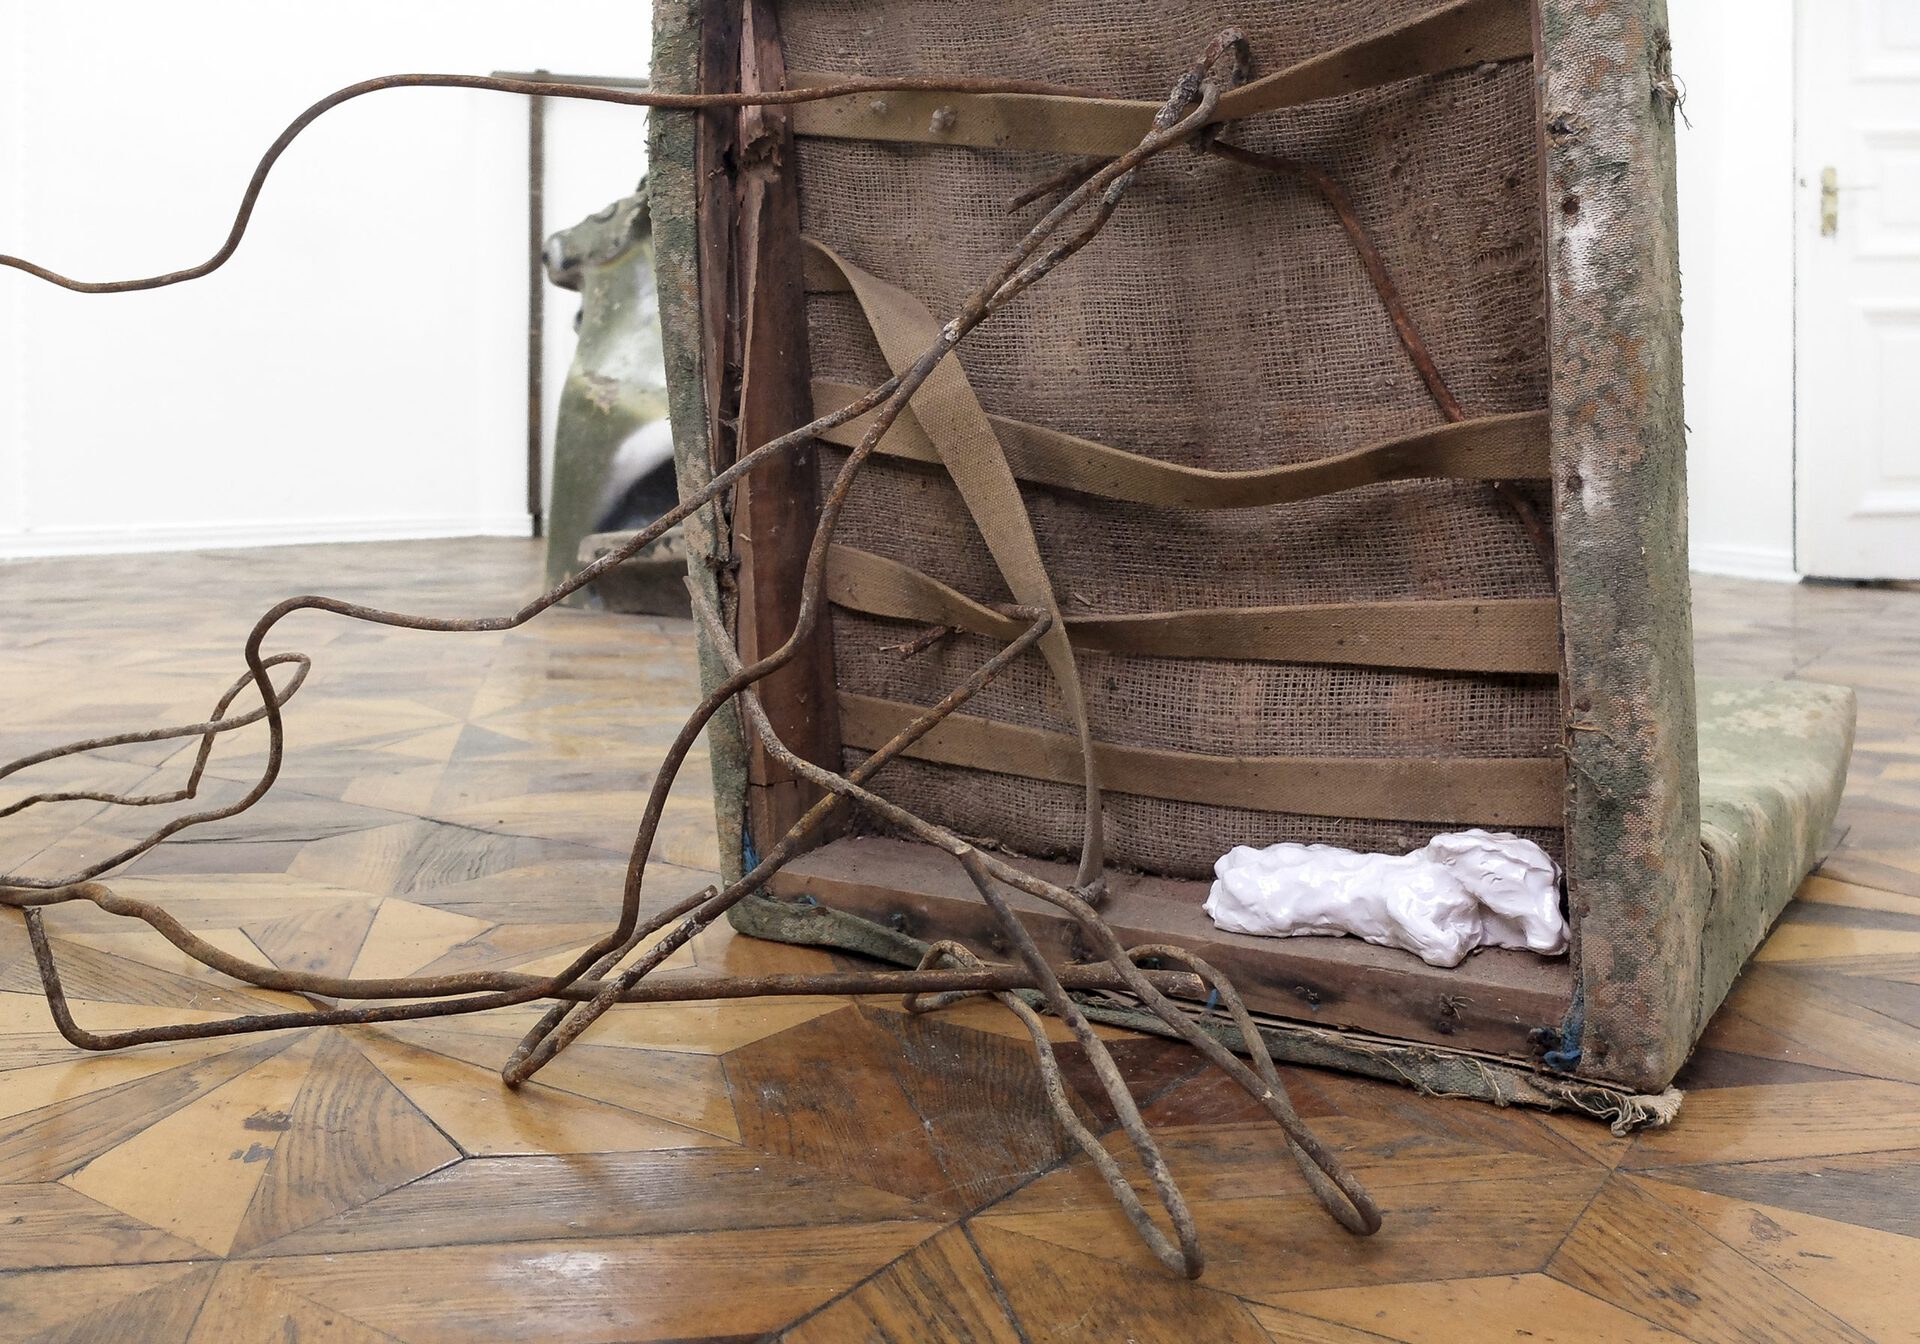 Sophie Jung, back supporting character with main lead unleashed (back) (detail), 2021. found chair tipped 90 degrees but still a chair, ceramic dogs, bent rebar poles resembling a hillside or a tangled dog leash.